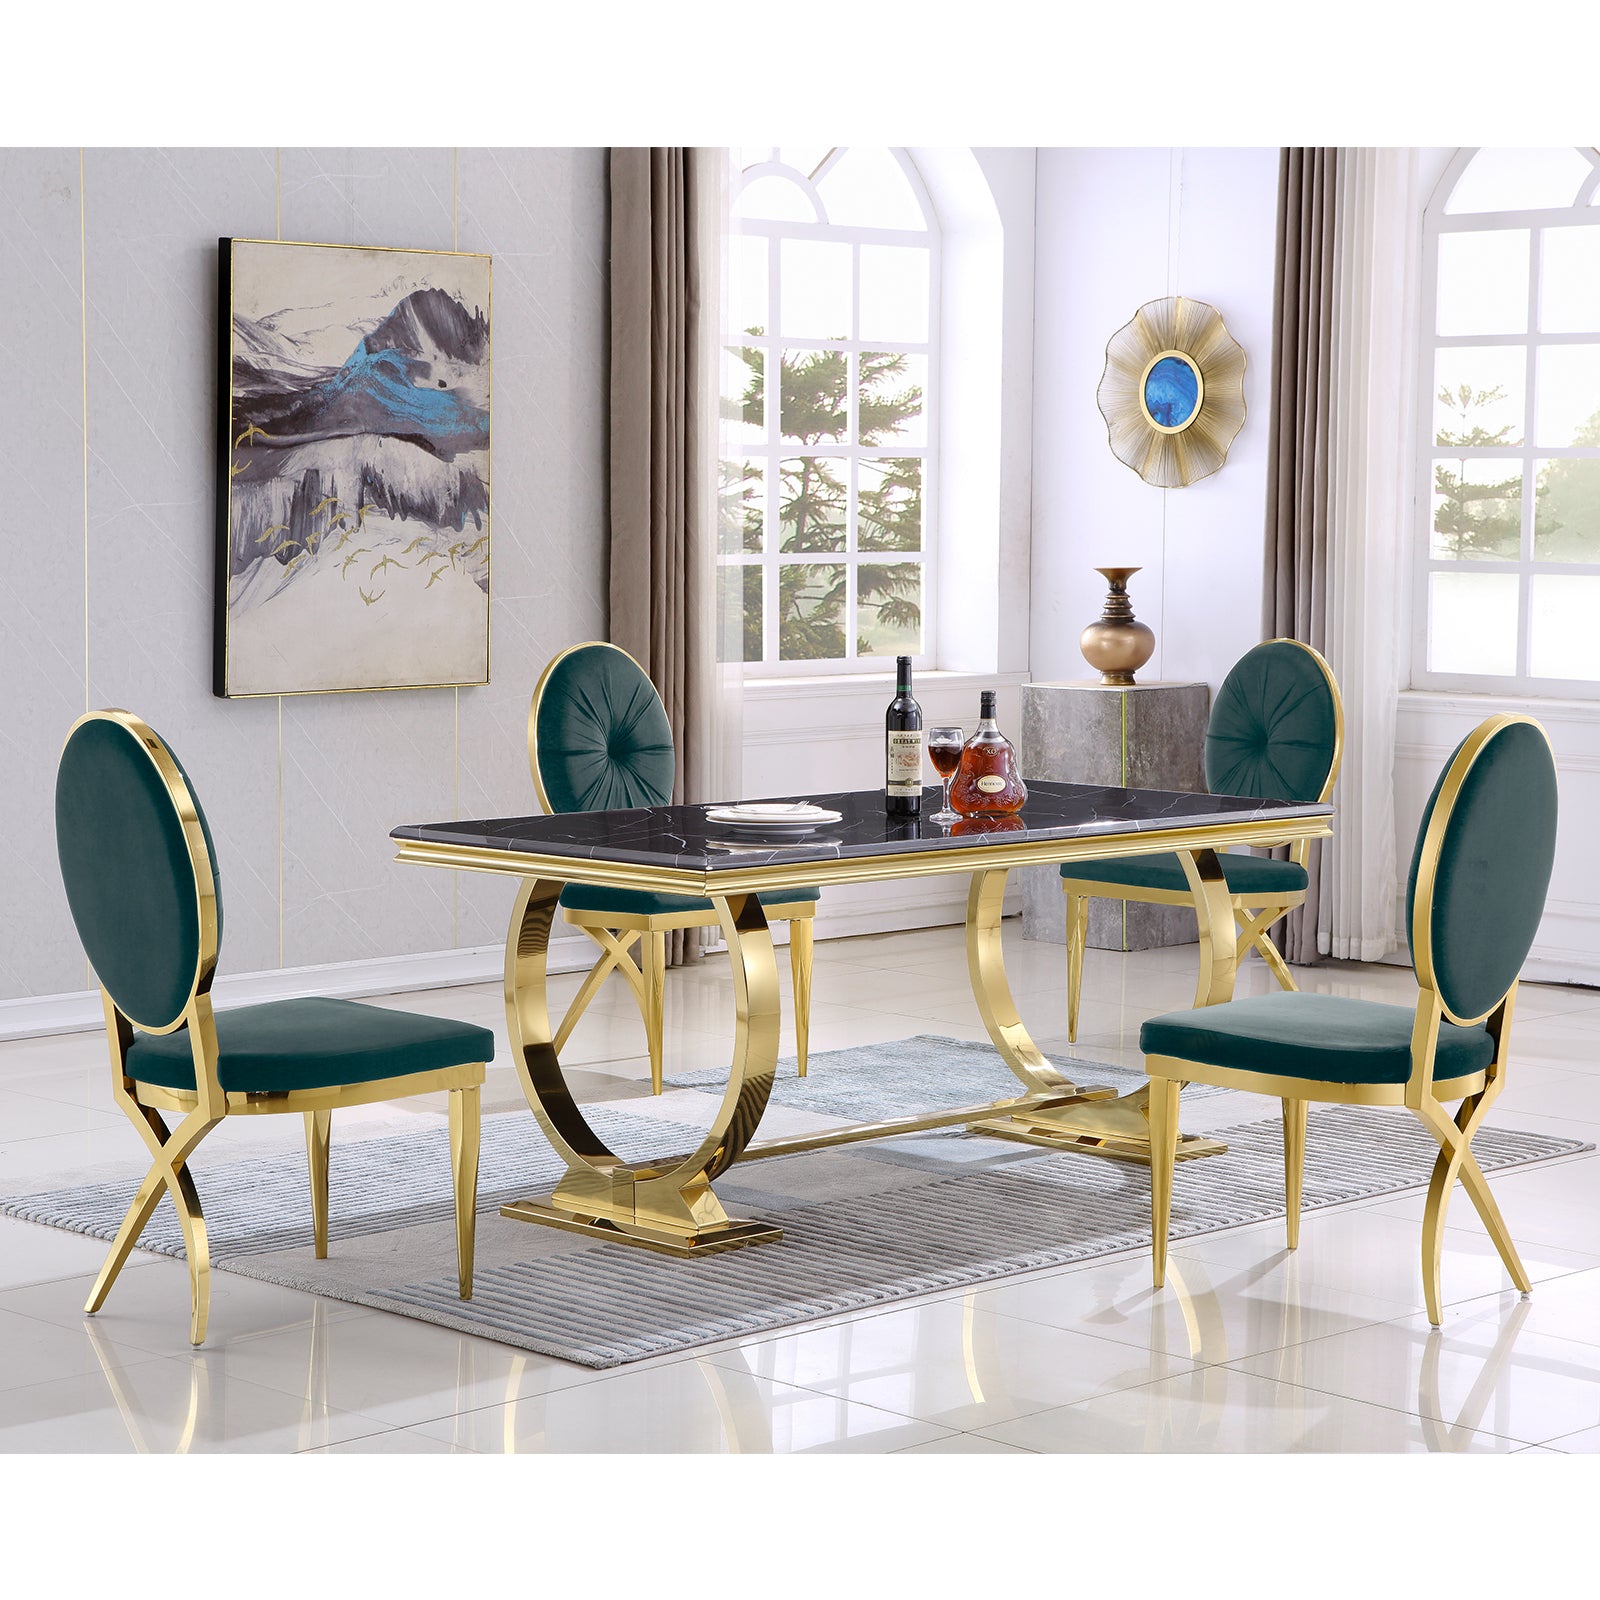 Wholesale Green King Louis dining chairs